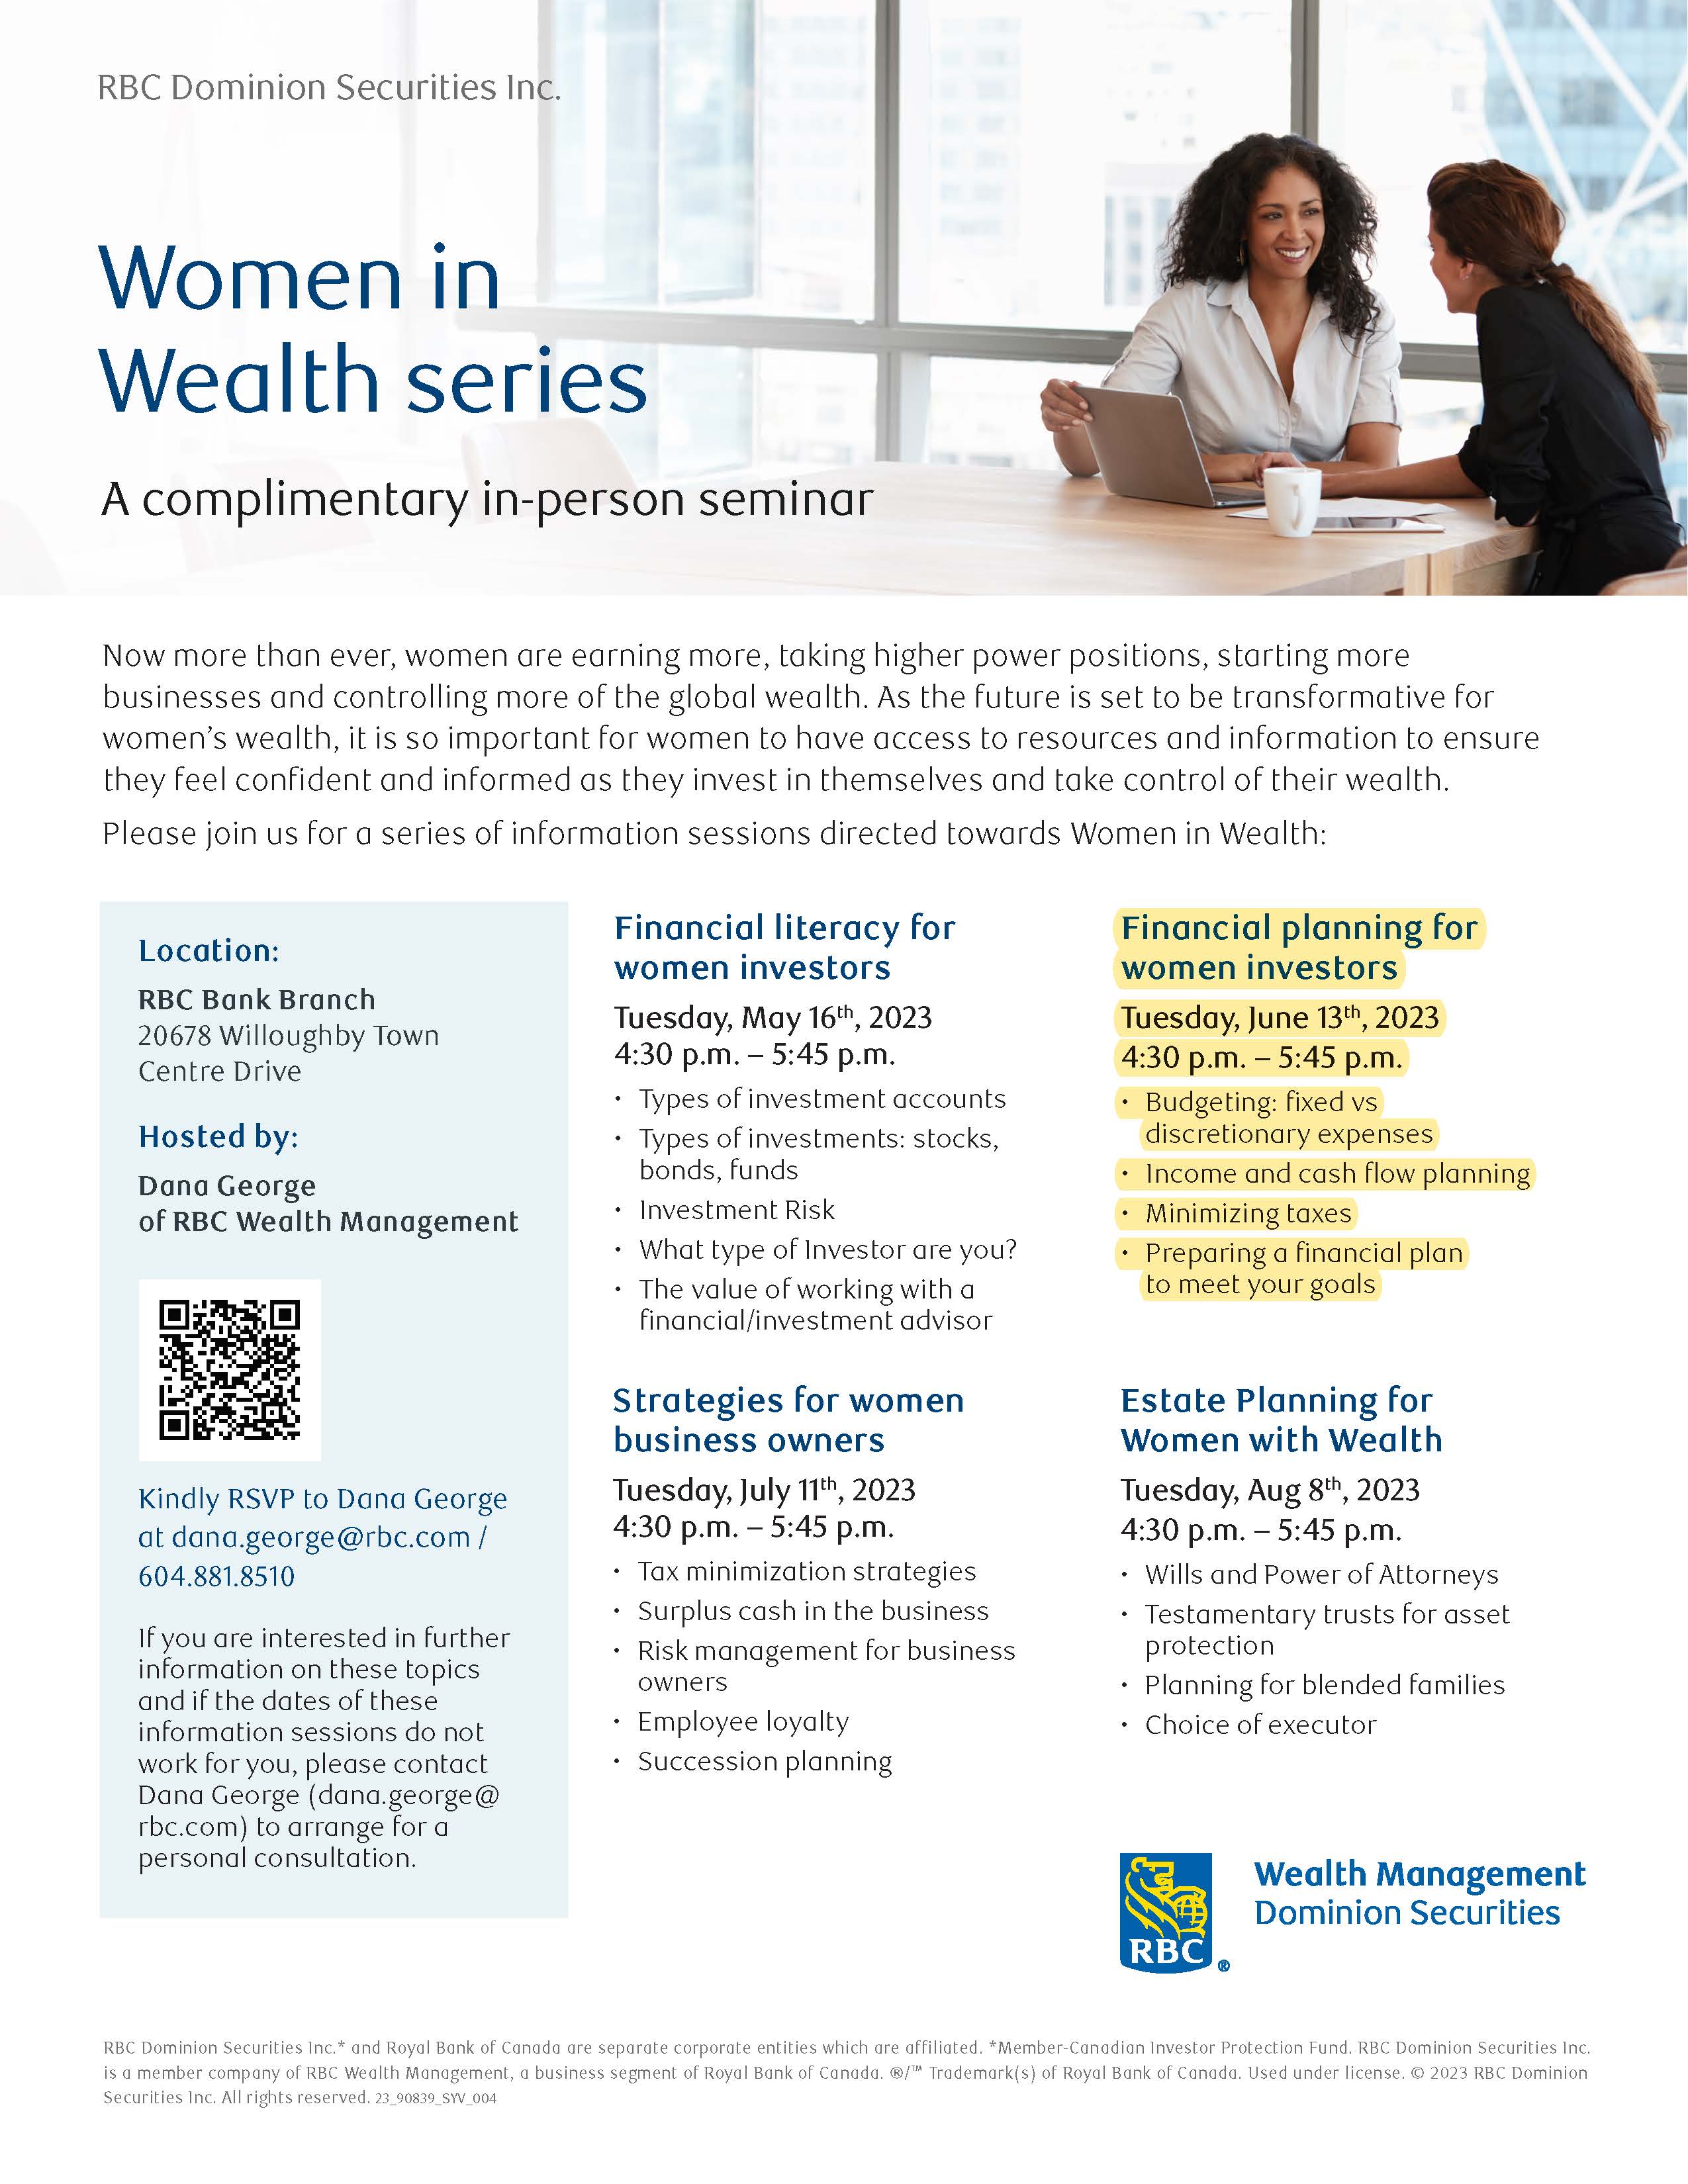 Image for "Women in Wealth Series" Hosted by Dana George, RBC Wealth Management